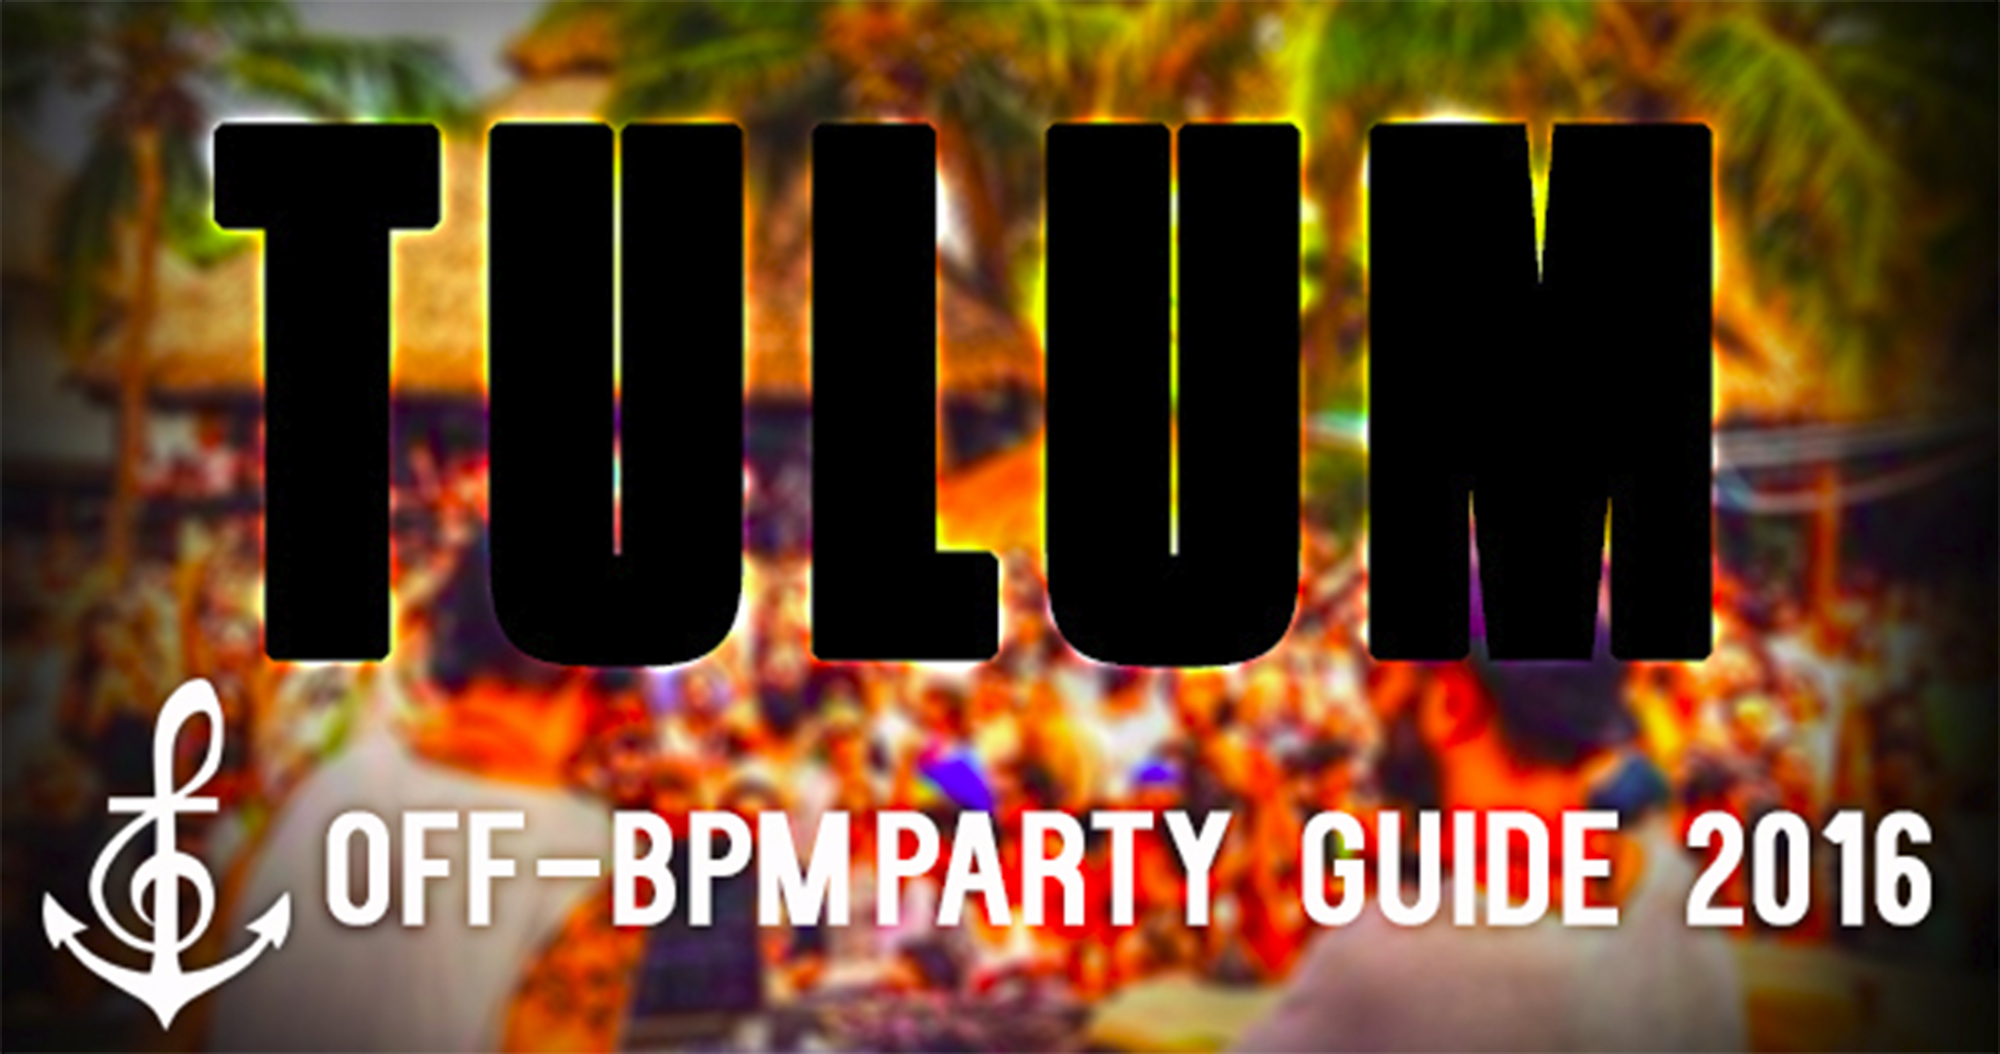 BPM 2016 Tulum Parties, Afterparties, Off-BPM, Beach Party, Festivals Guide by DeeplyMoved